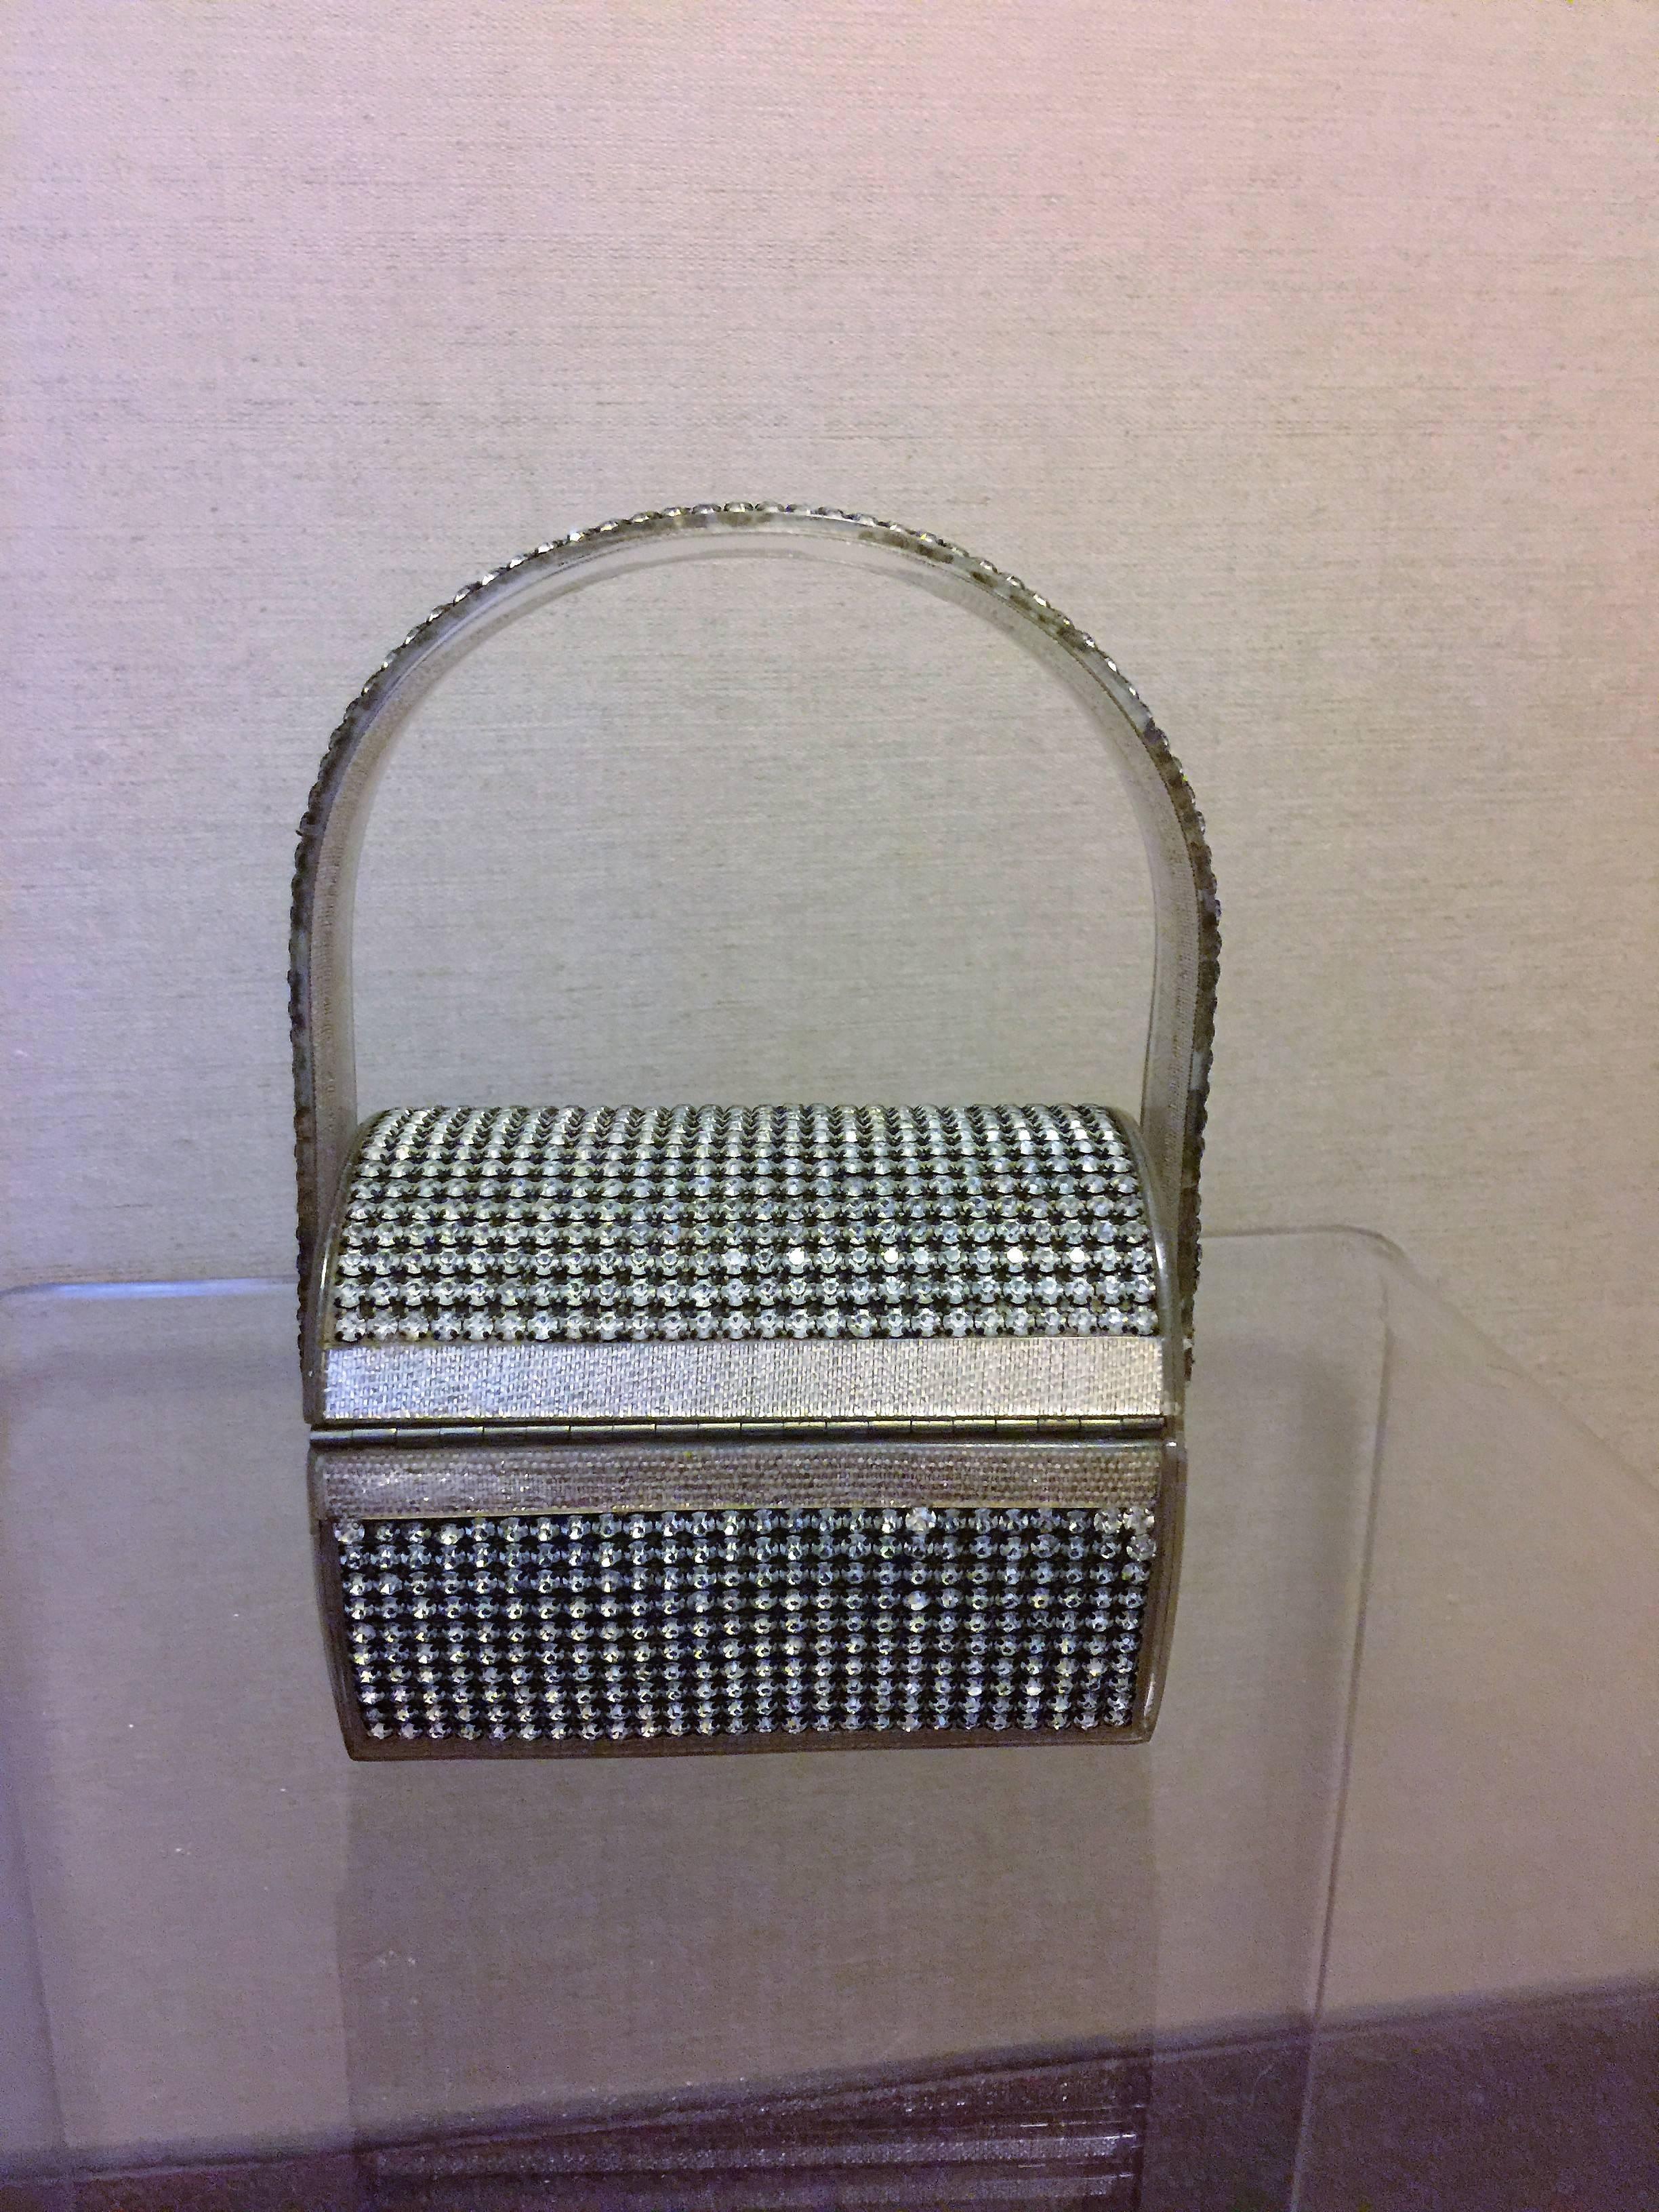 Stunning Wilardy Silver Lame Rhinestone Petite Lucite Handbag In Excellent Condition For Sale In New York, NY